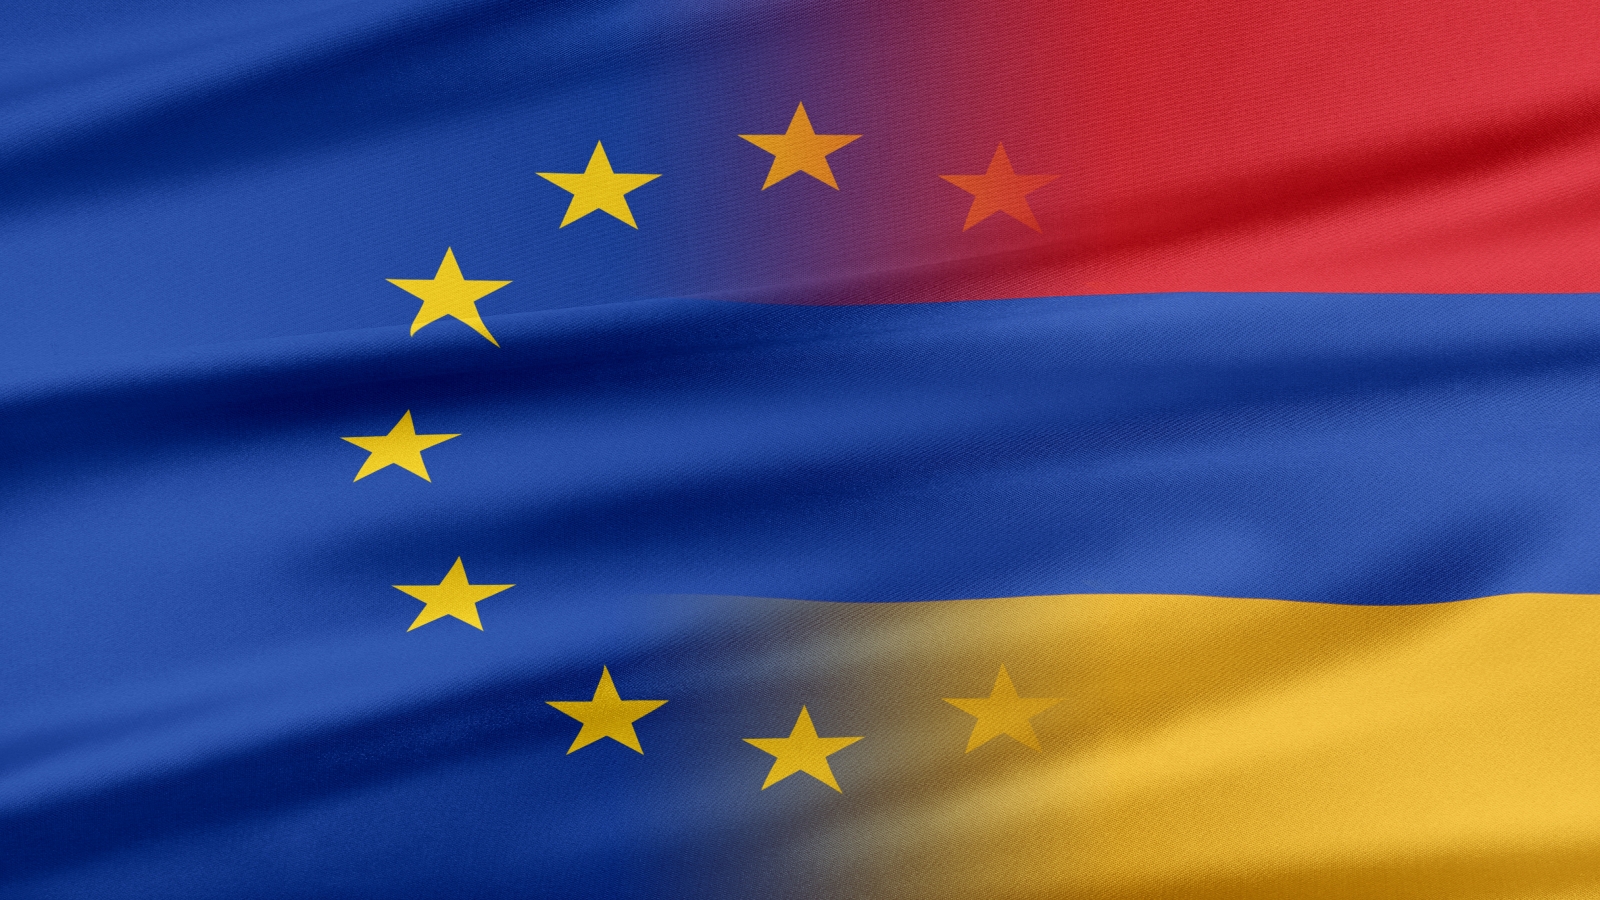 European Union reiterates its support to Armenia in its efforts to build prosperous and democratic society